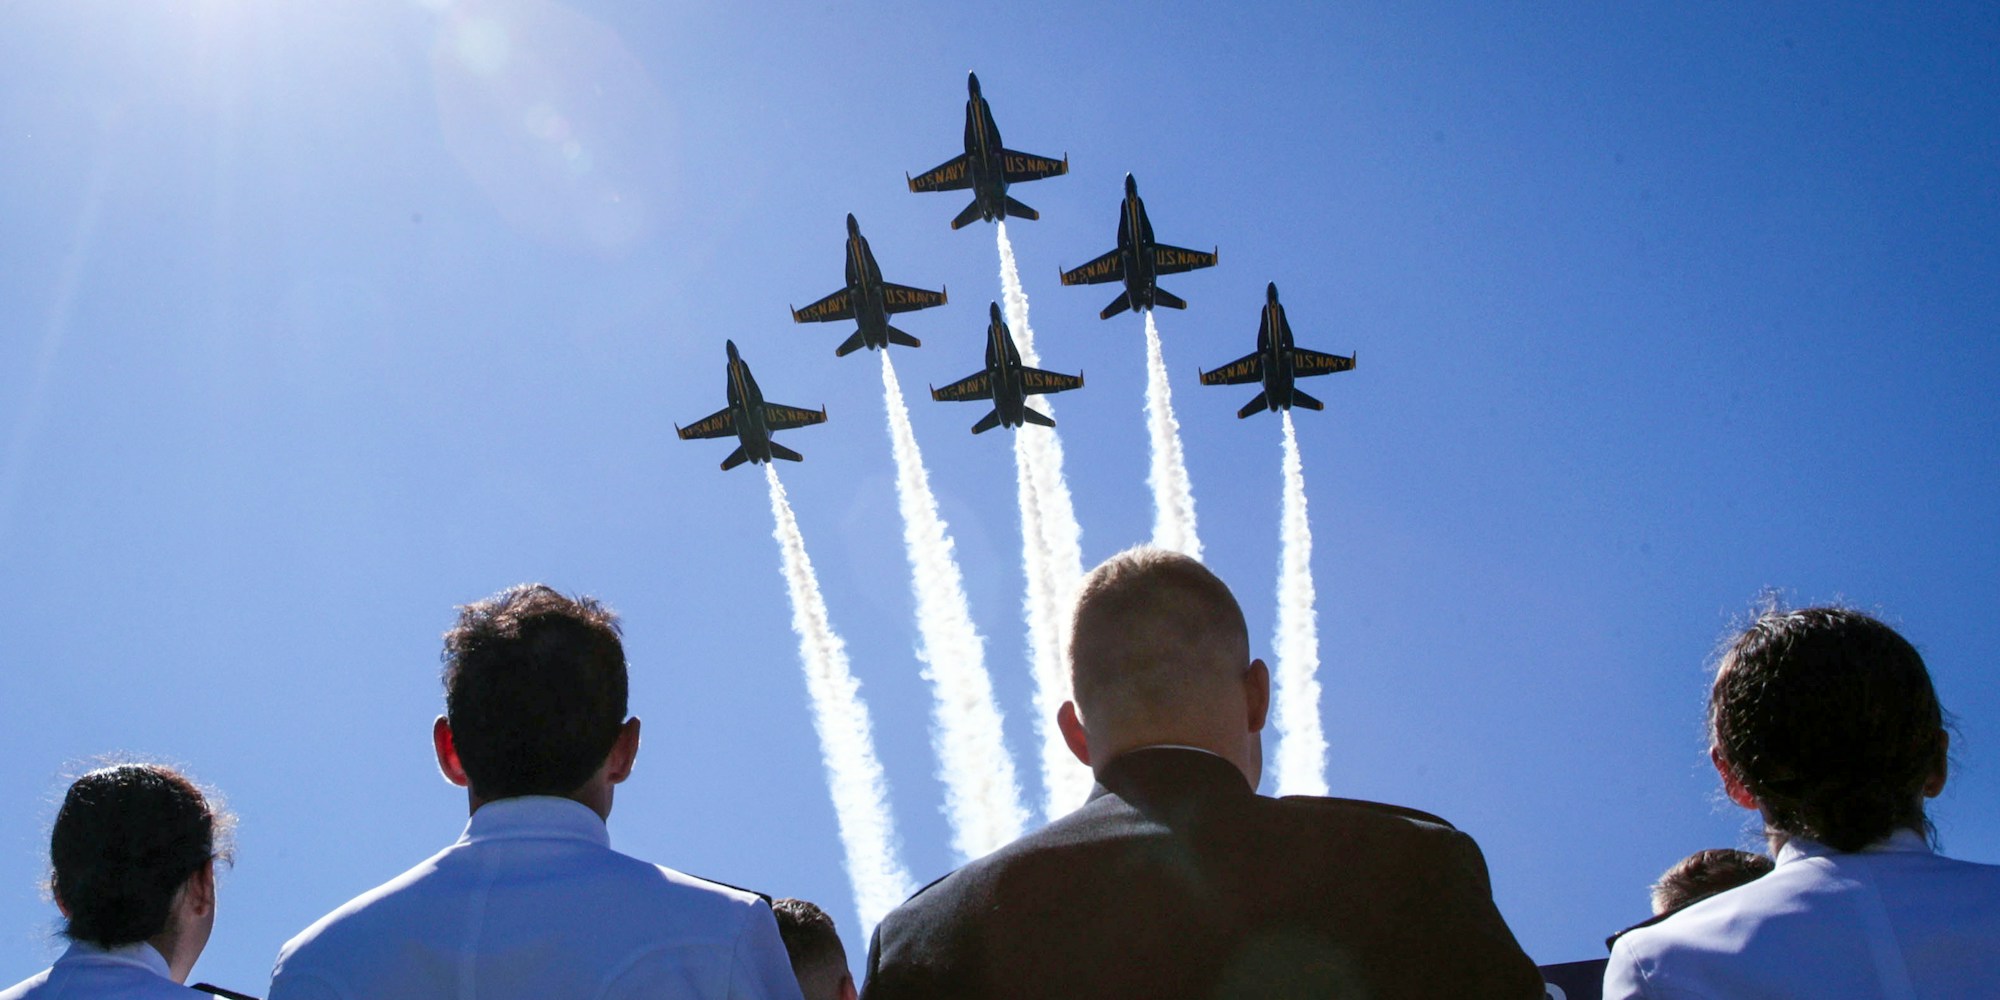 ANNAPOLIS, MARYLAND - MAY 24:   US Navy's Blue Angels fly over the Navy-Marine Corps Memorial Stadium during a graduation ceremony at the U.S. Naval Academy May 24, 2019 in Annapolis, Maryland. The graduating class will be sworn into the Navy as ensigns or into the Marine Corps as second lieutenants in the ceremony.   (Photo by Alex Wong/Getty Images)